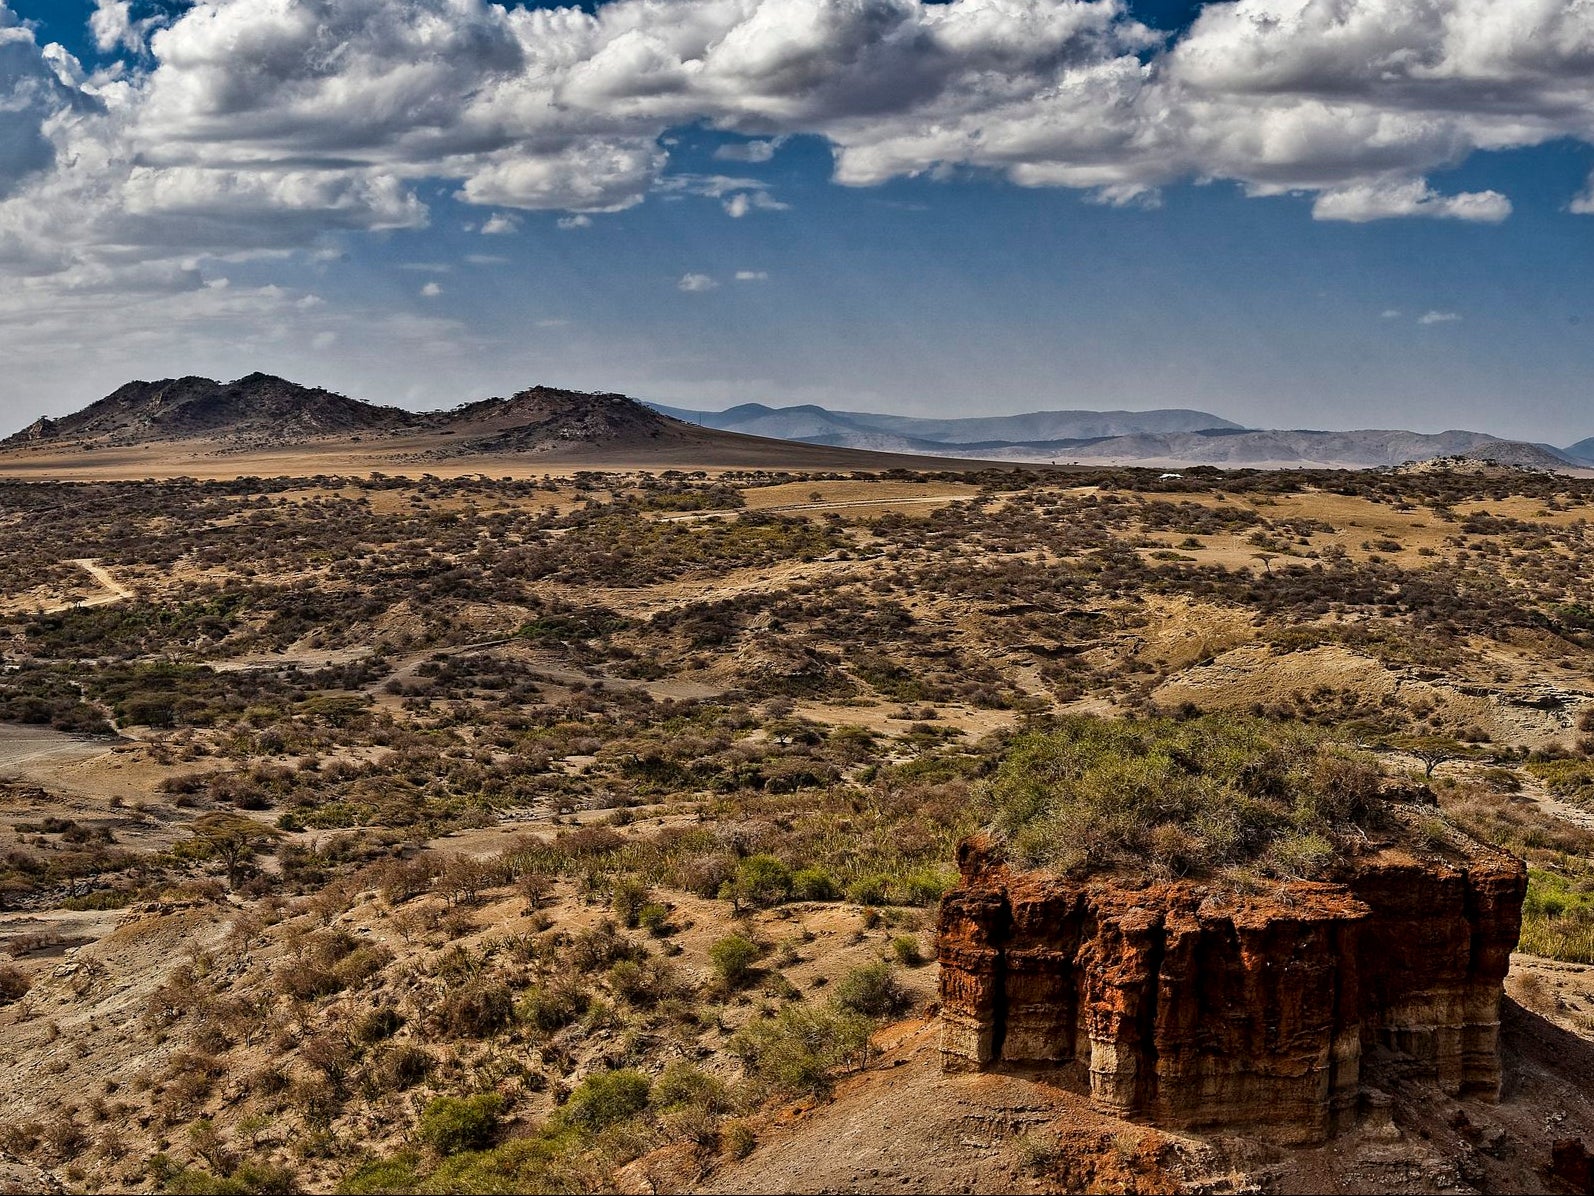 Olduvai Gorge, Tanzania, where Homo habilis became the first ancient human species to develop sophisticated stone tool technology